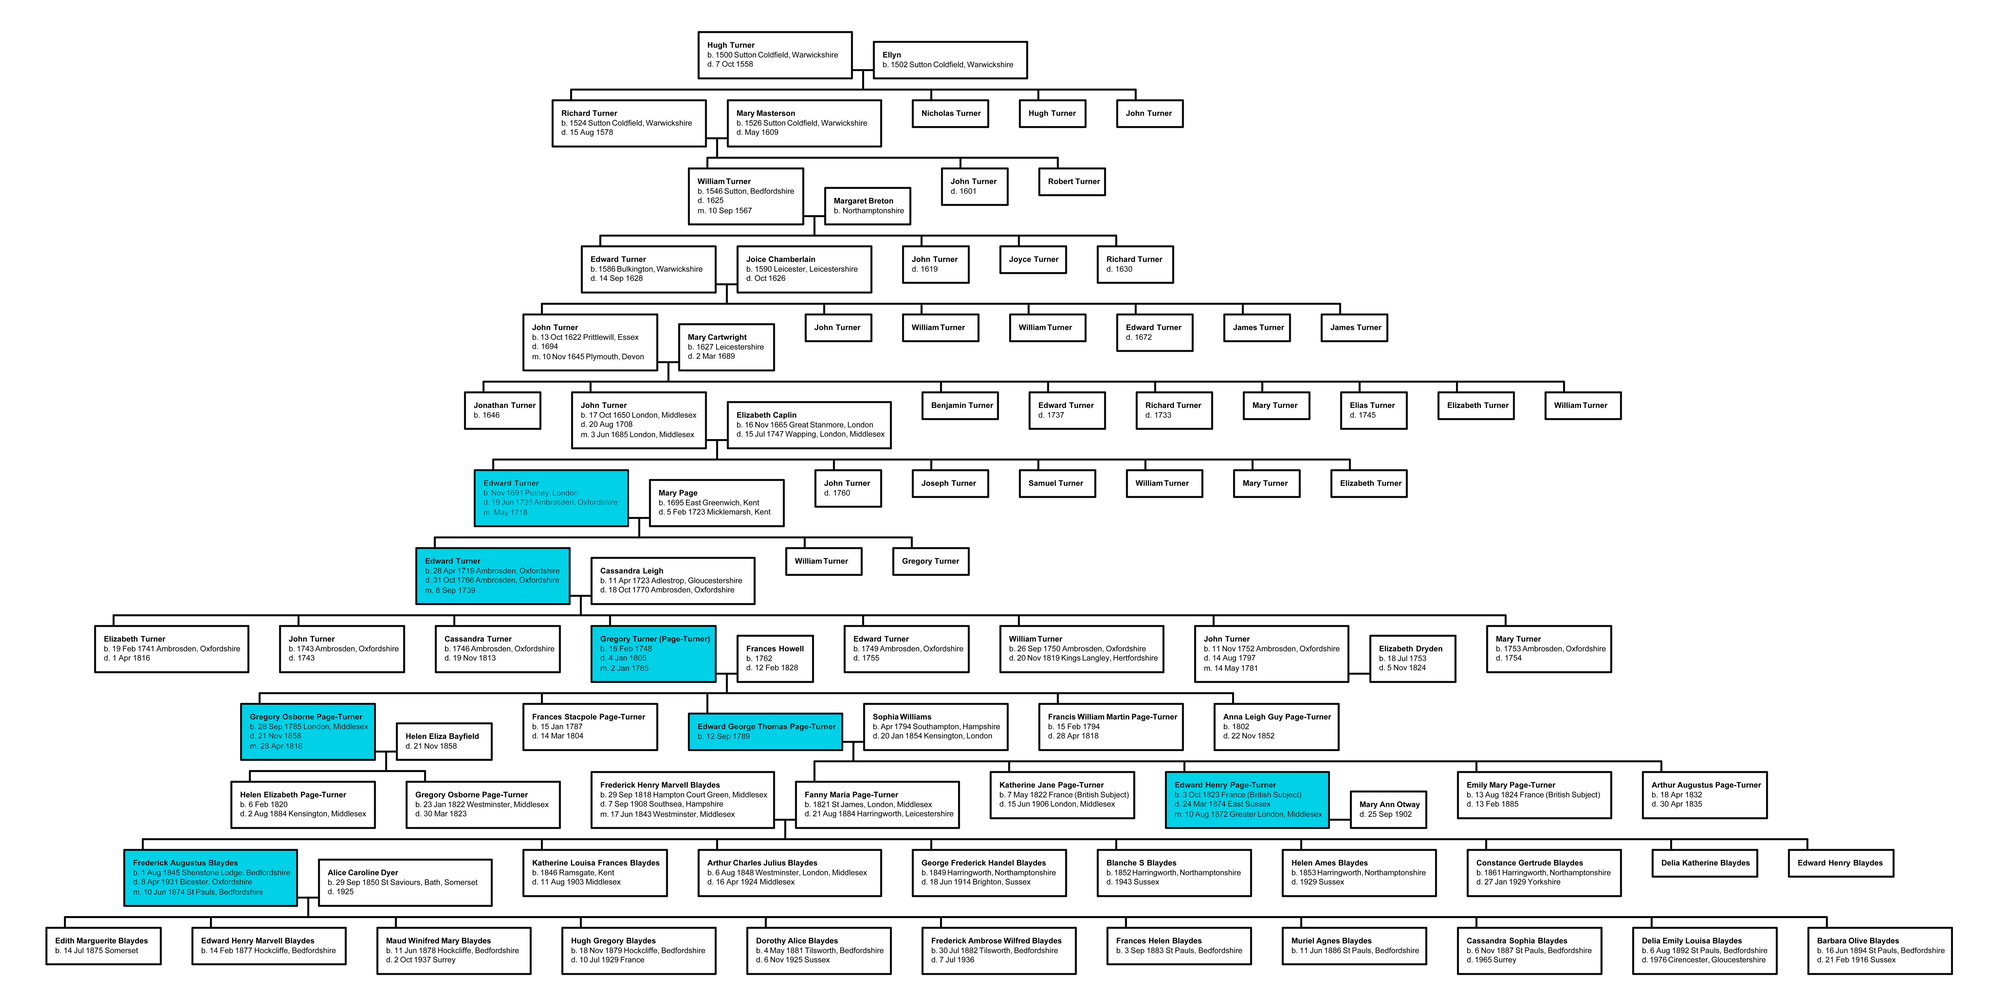 Turner/Page-Turner family tree. The highlights show the line of succession.